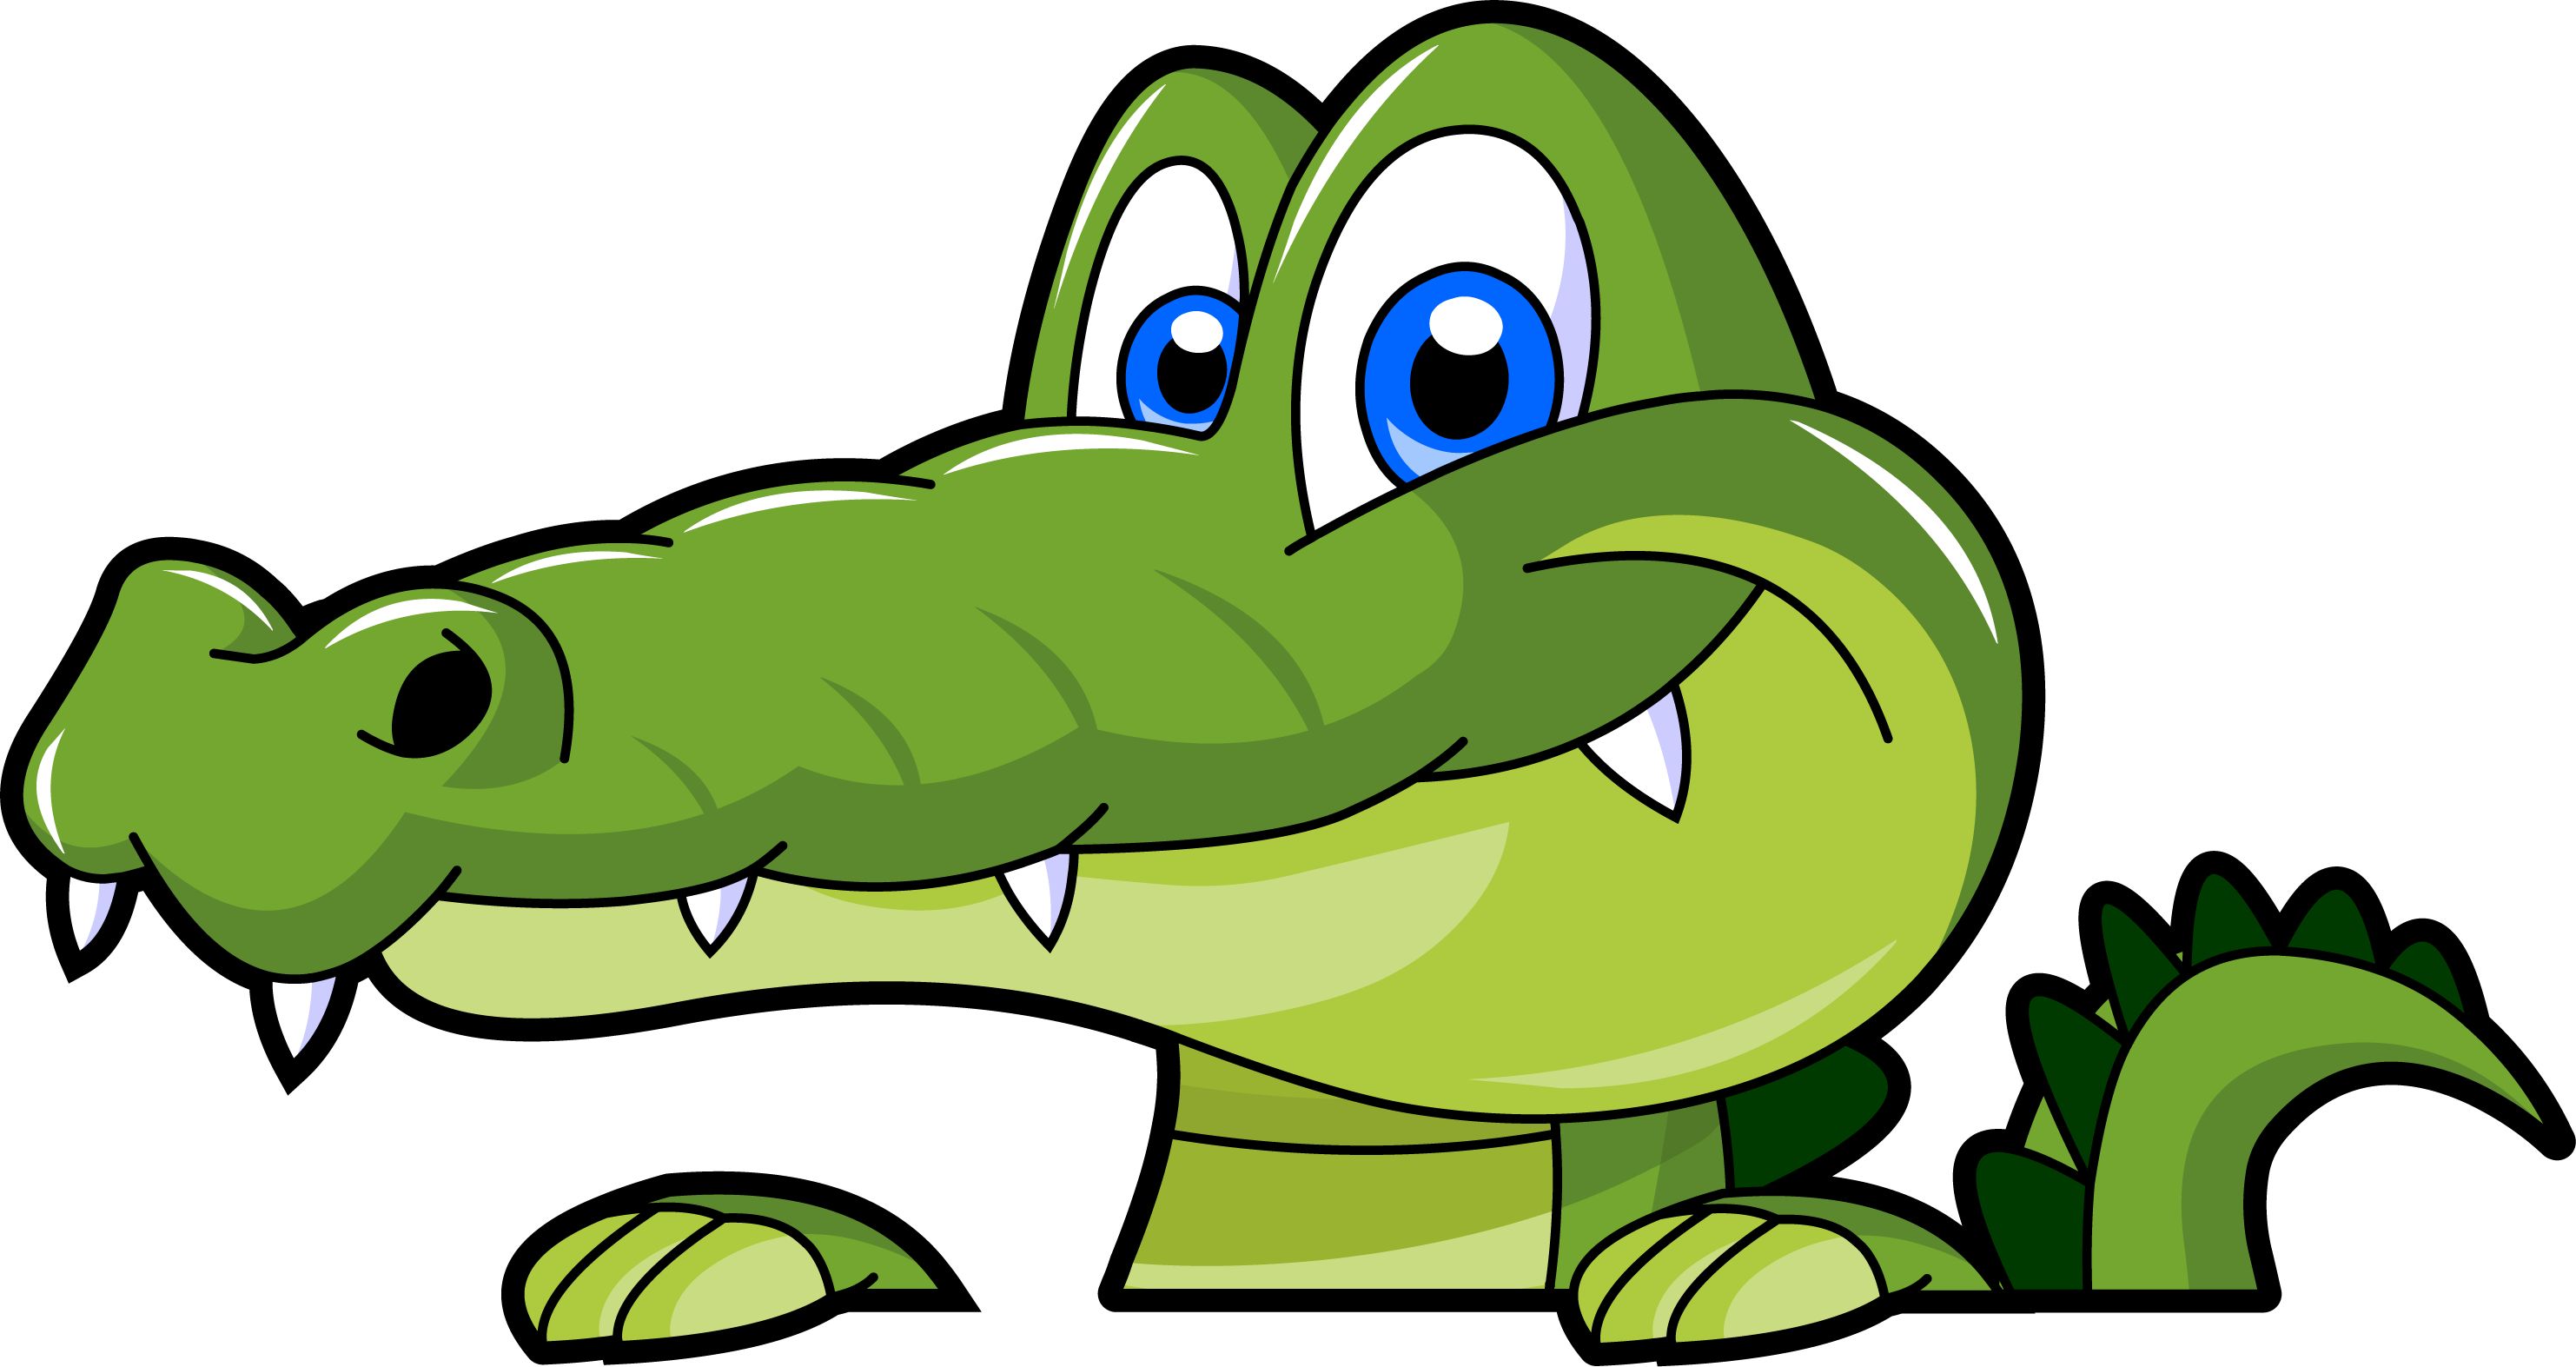 How To Draw A Cartoon Alligator Images & Pictures - Becuo